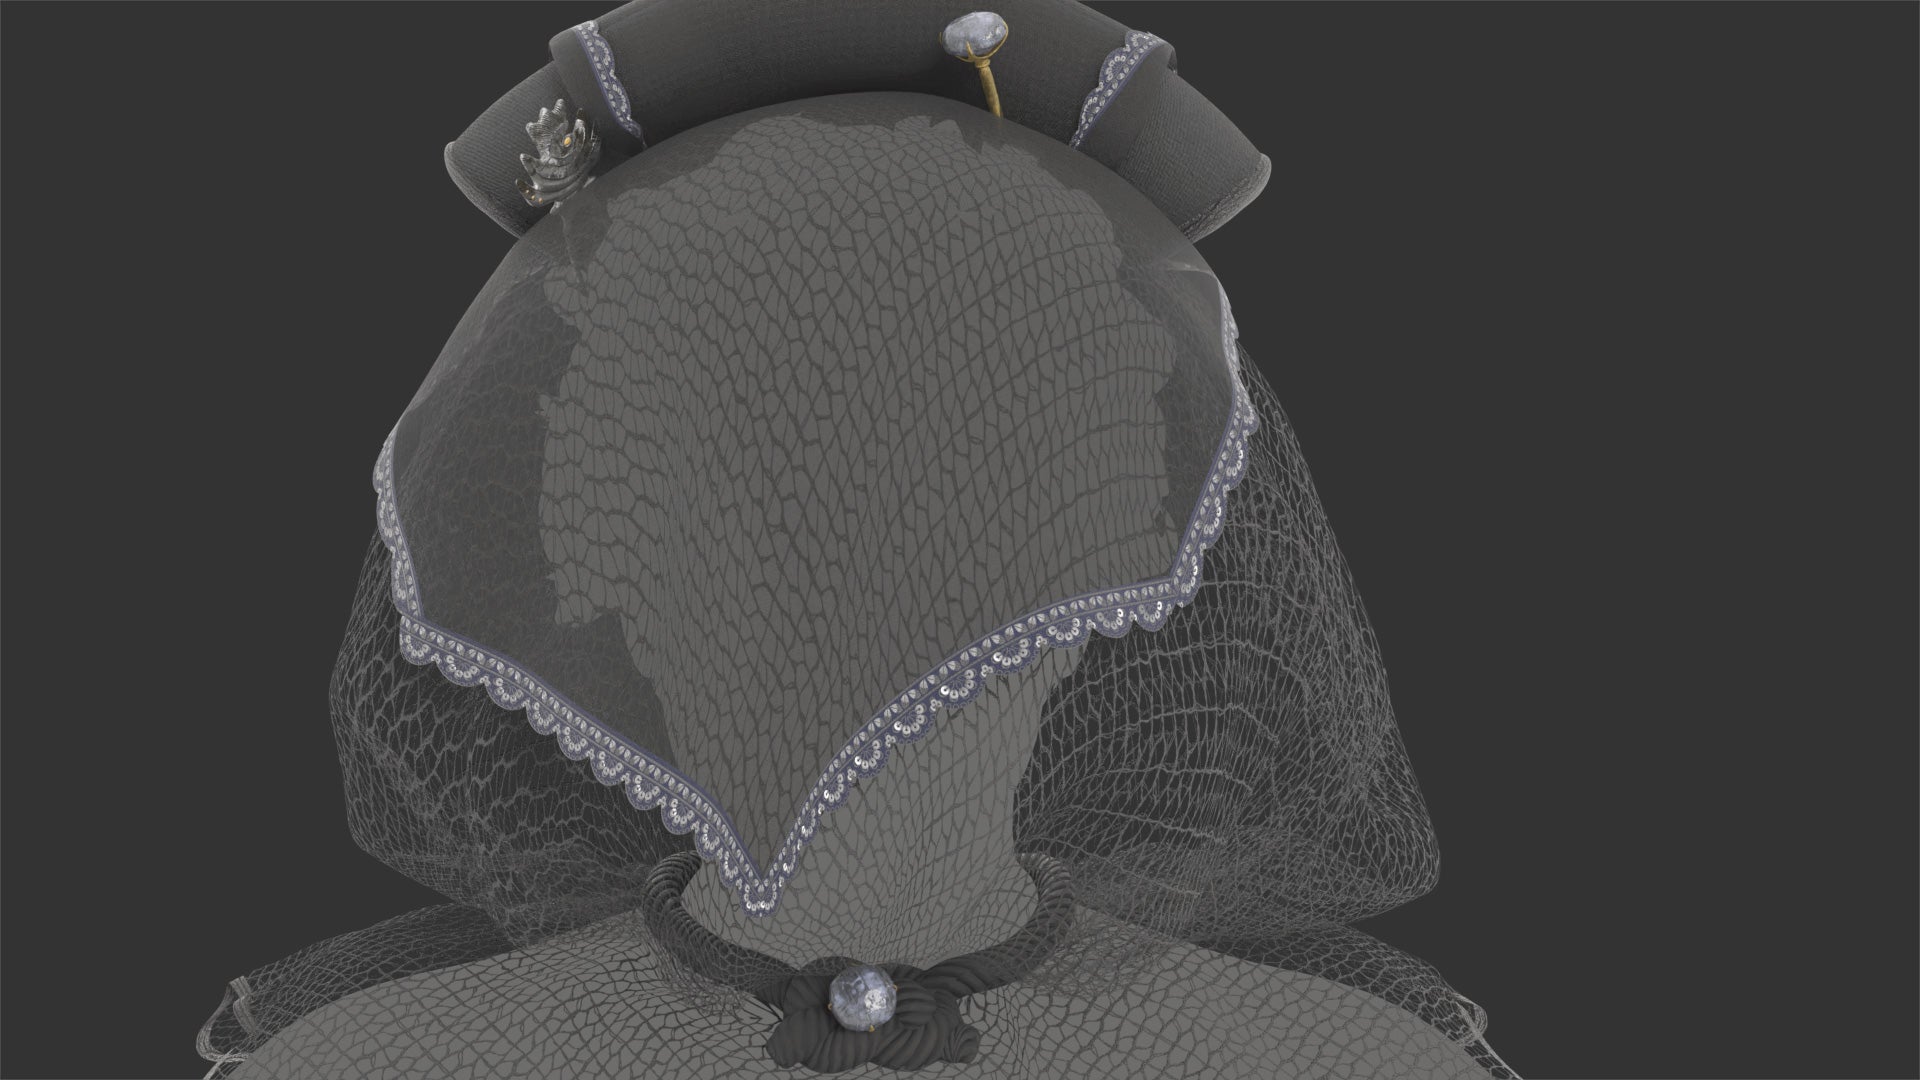 Medieval Fantasy wimple, head dress gothic style 3D model for Blender, with low polycount and PBR textures